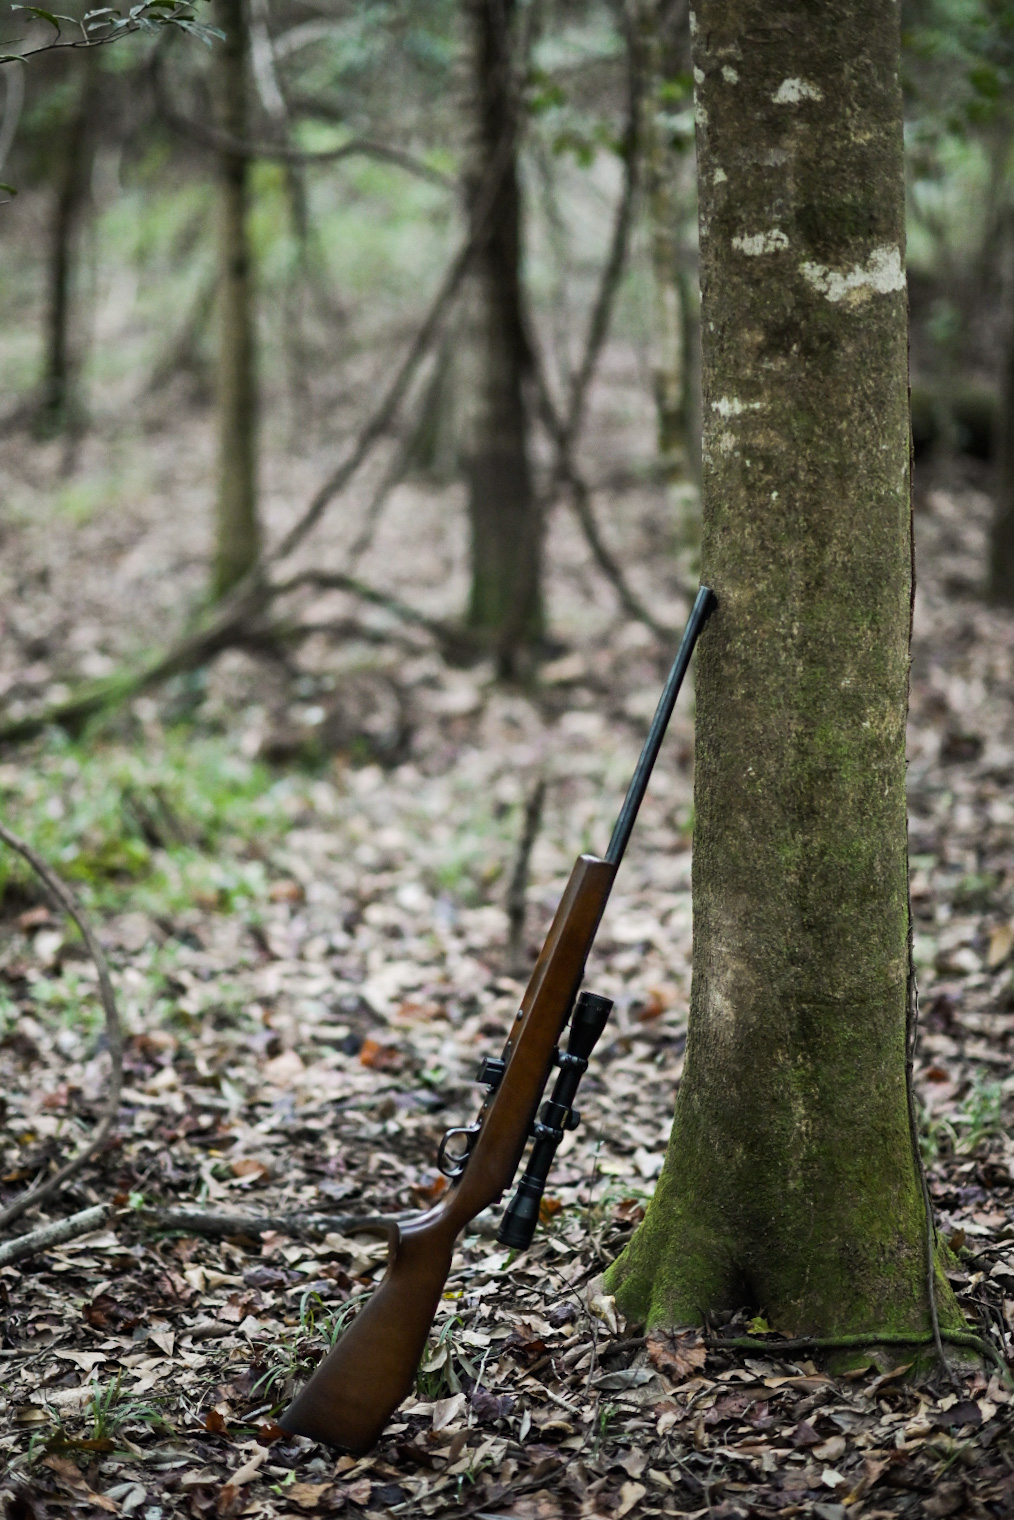 A .22 rifle rests on the trunk of a young oak tree